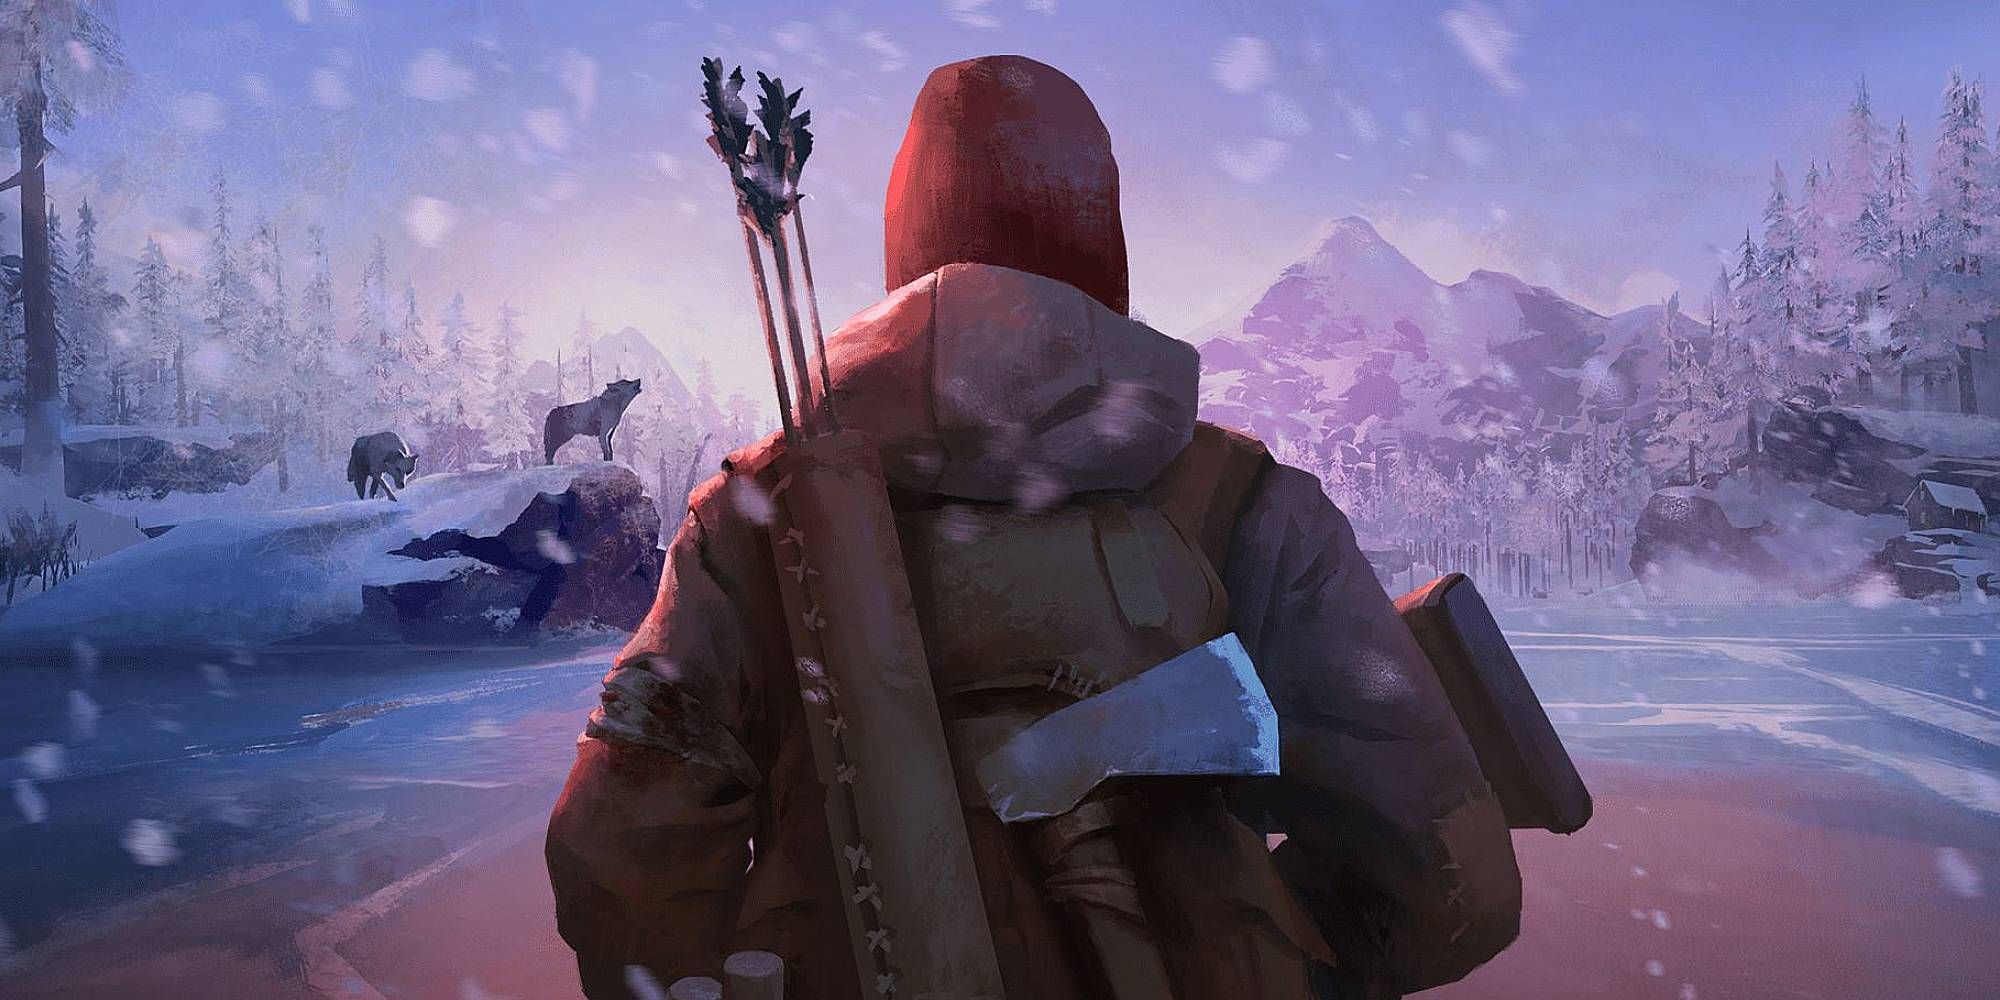 A figure poses amidst a snowy landscape in The Long Dark cover art